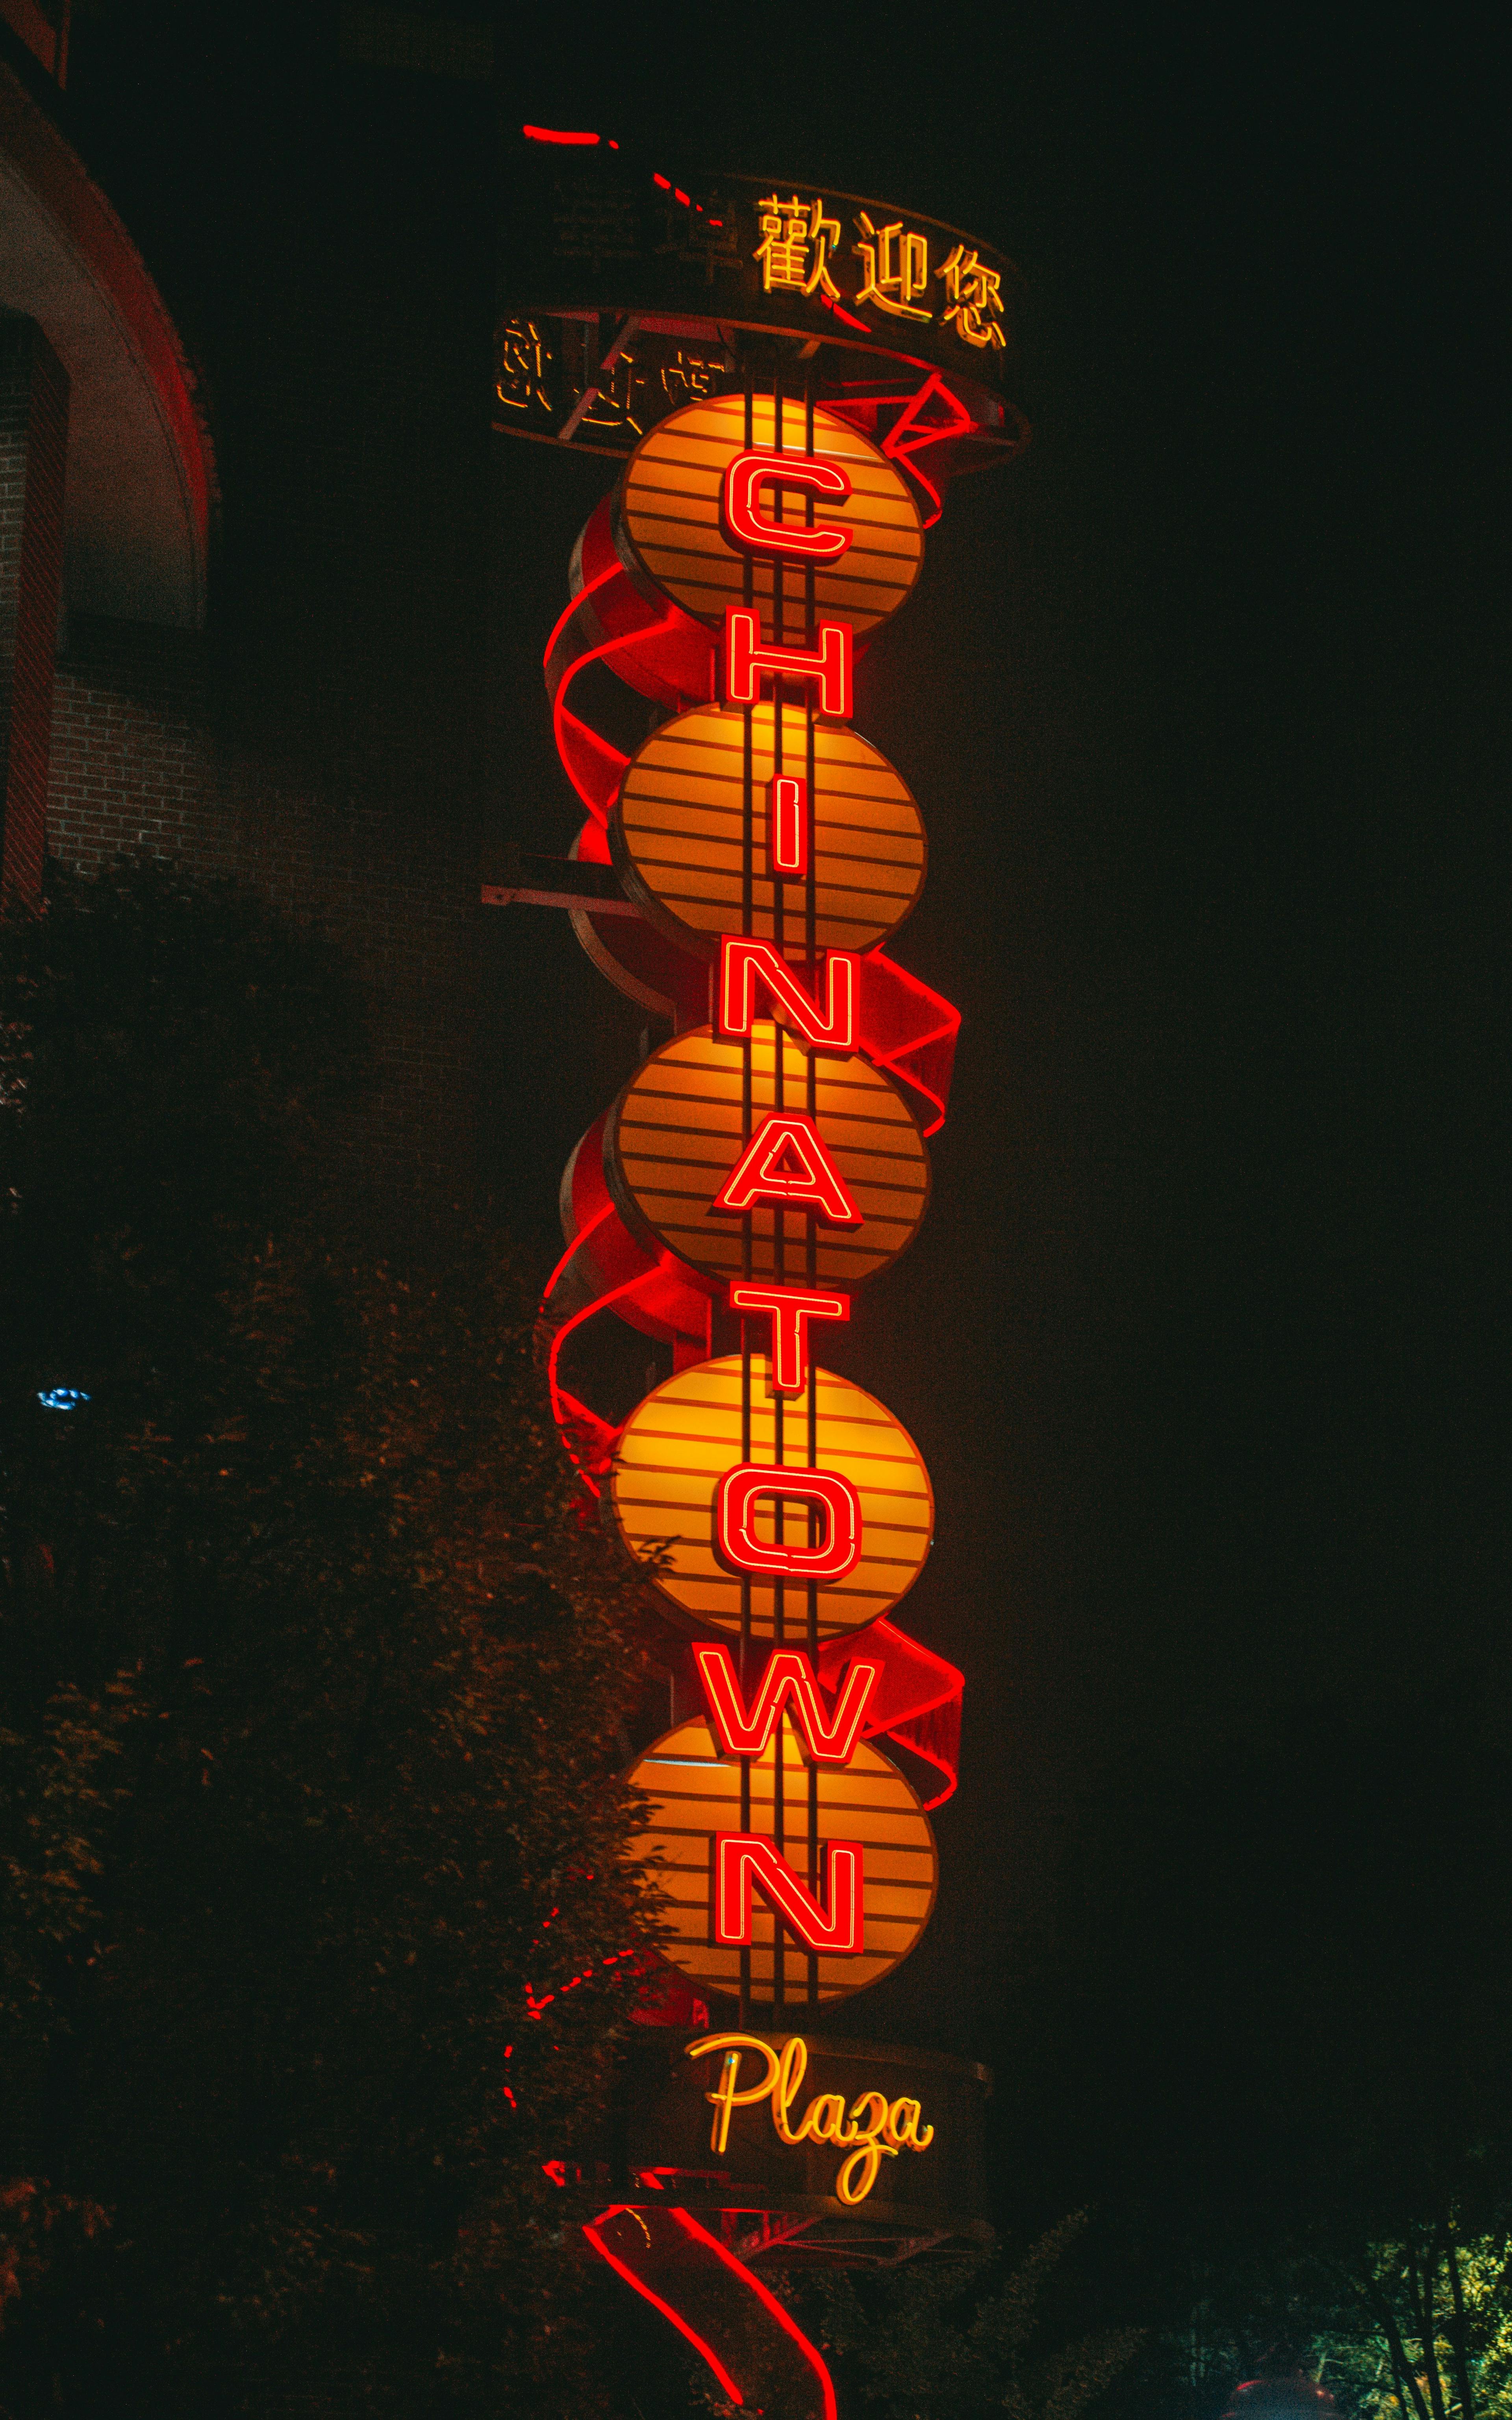 Chinatown neon sign in Vancouver Canada.